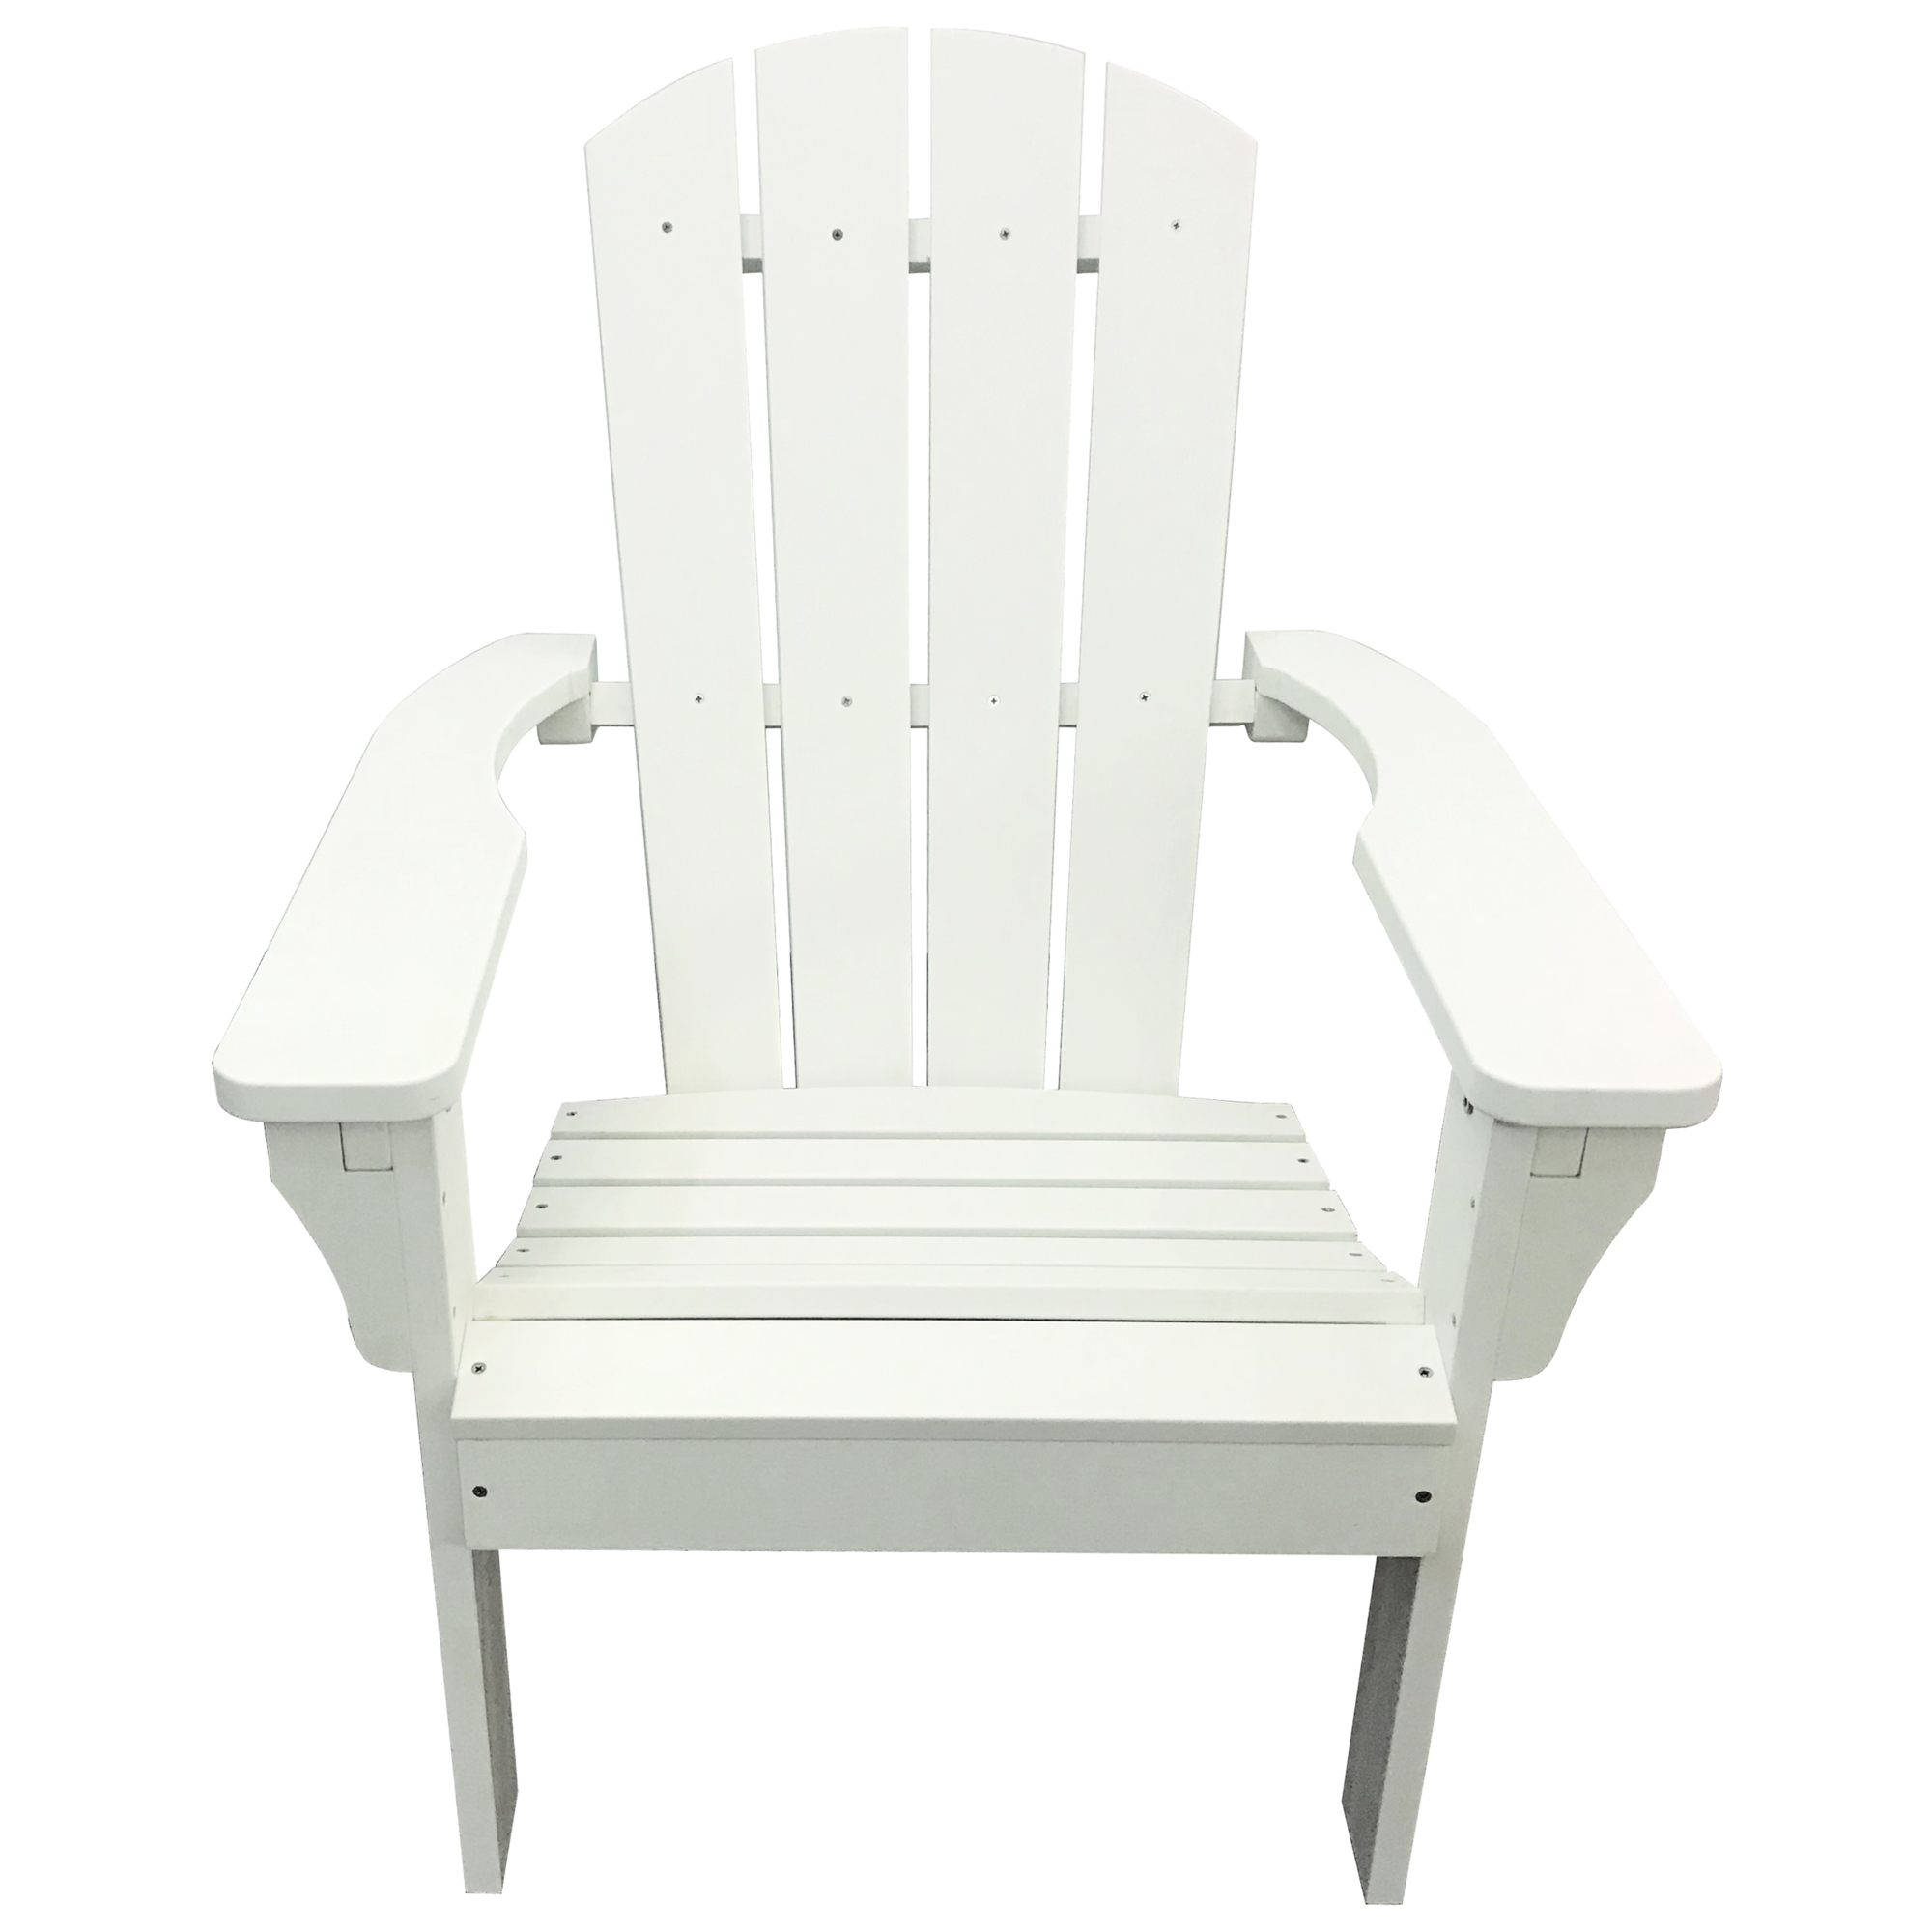 Leigh Country, White Poly Resin Adirondack Chair, Primary Color White, Material Poly, Width 28.11 in, Model TX 94024